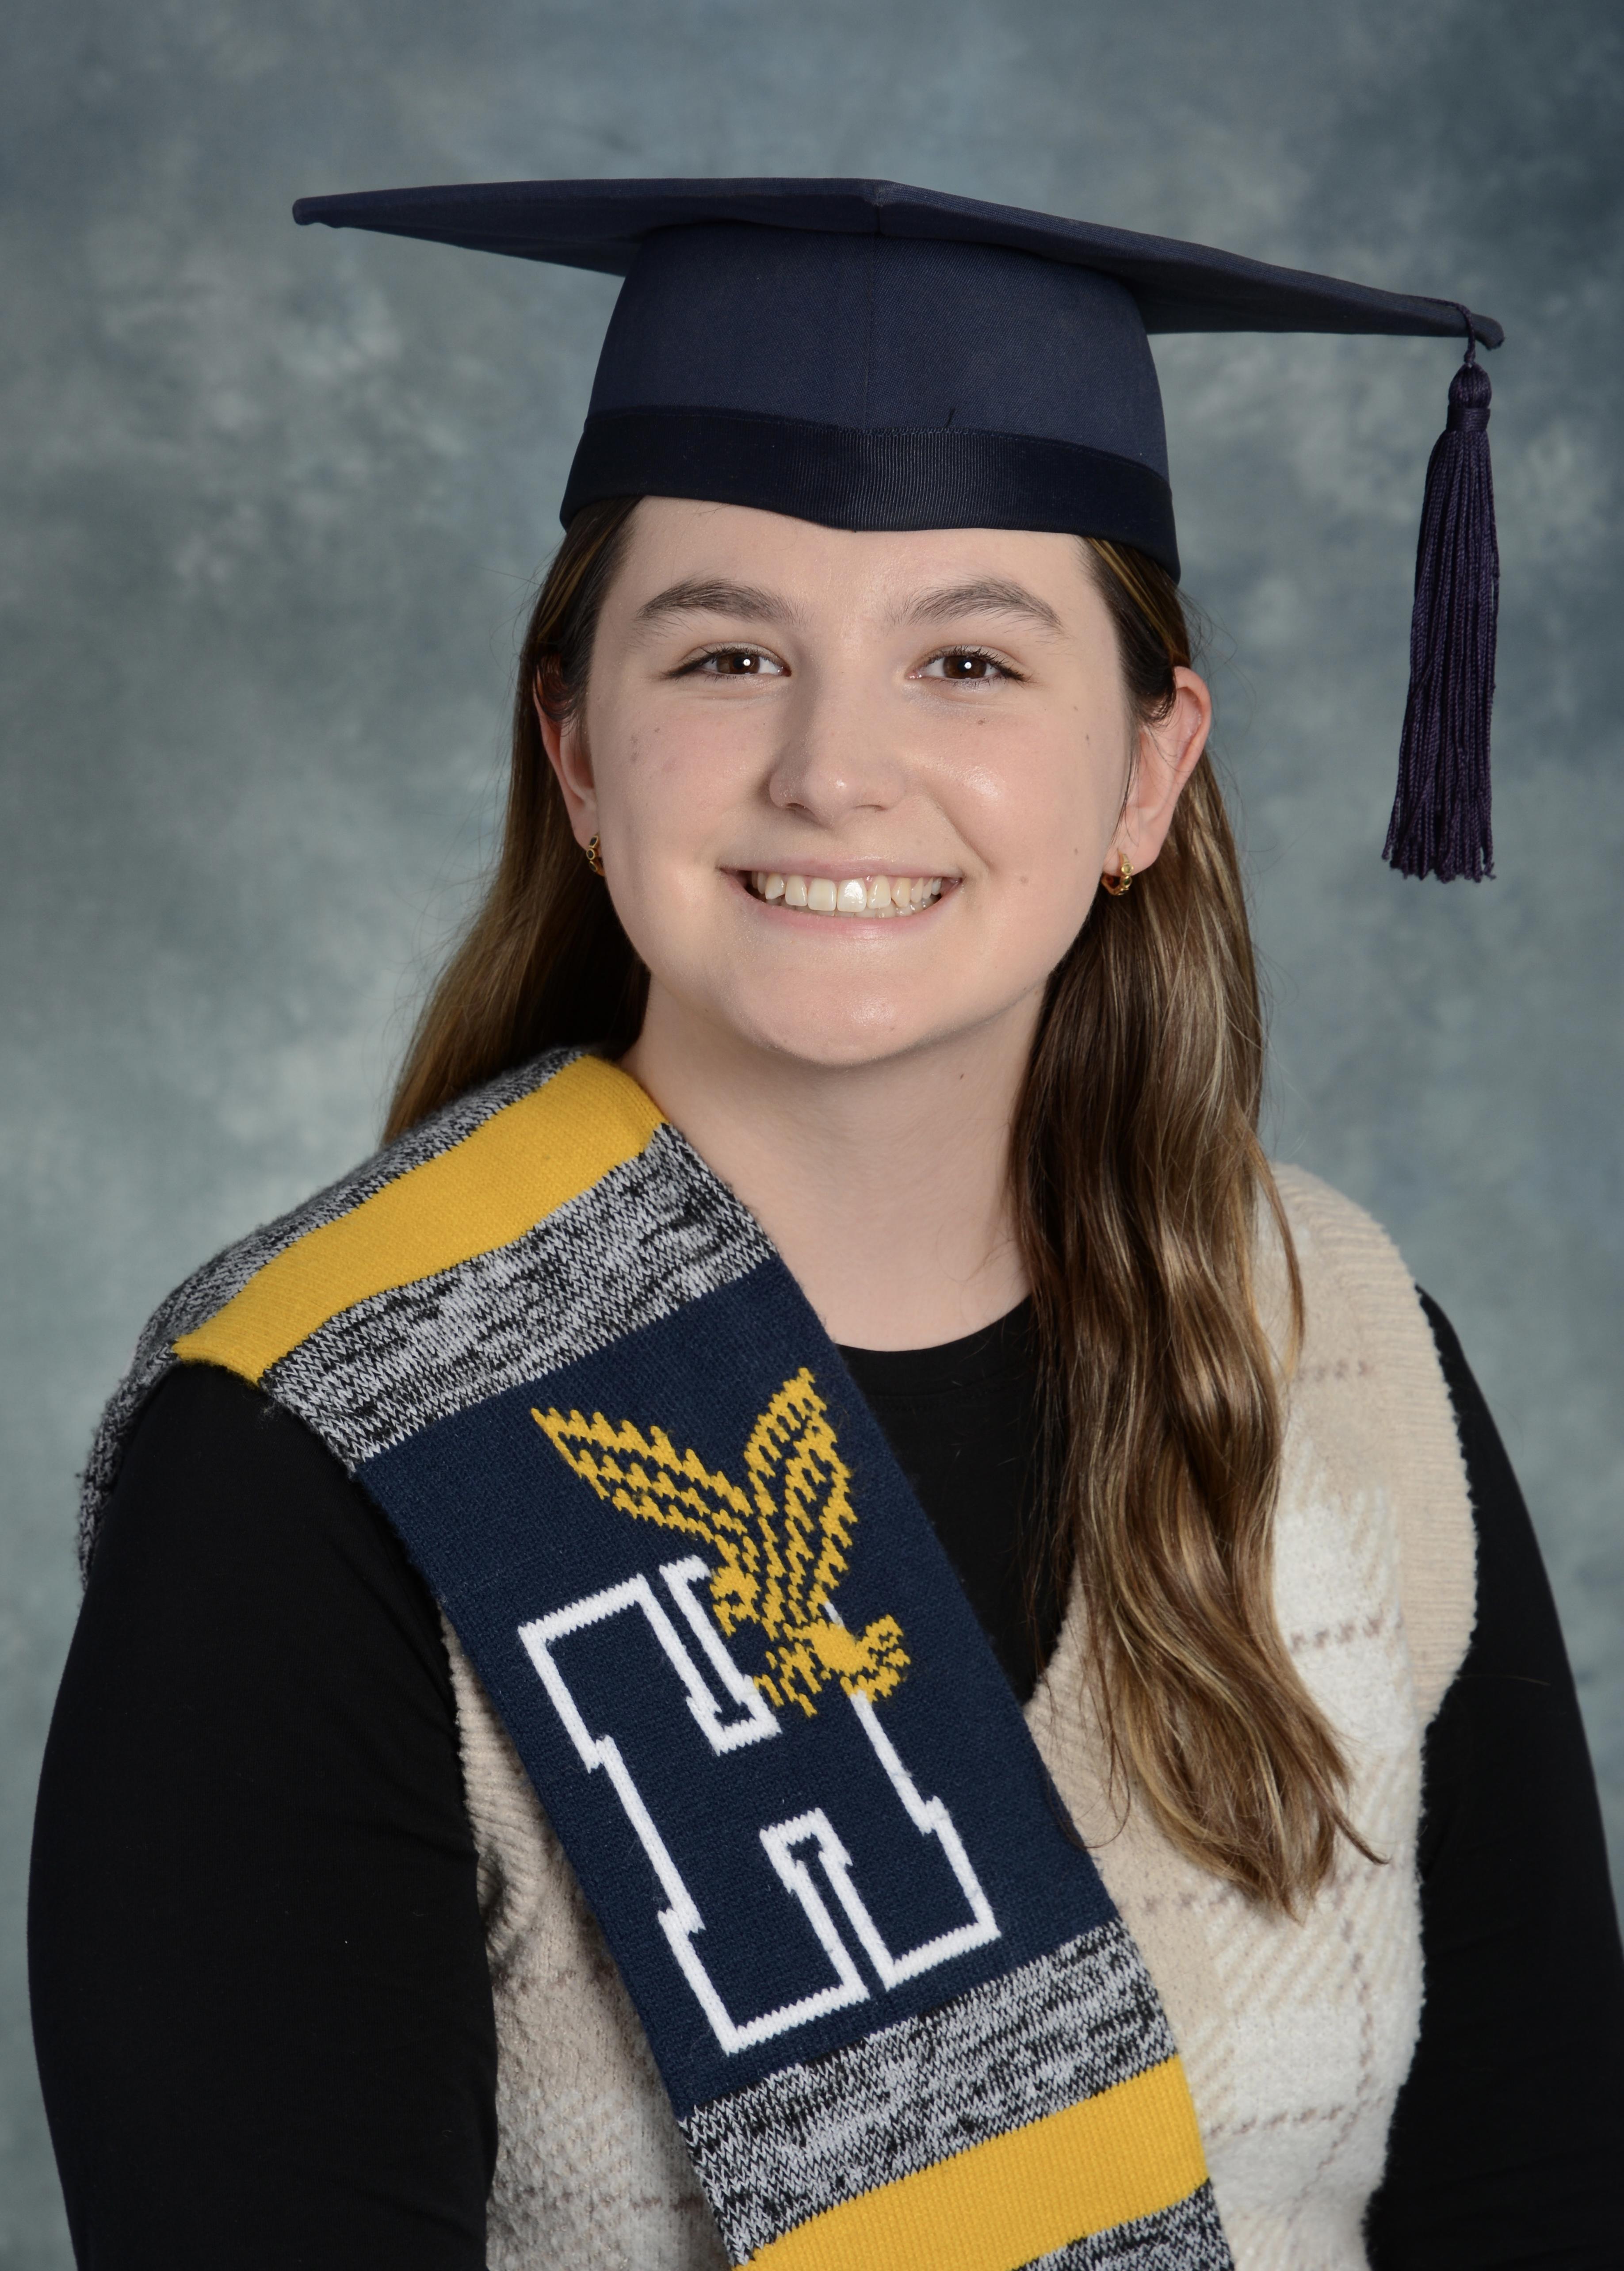 A head-and-shoulders photo of a person wearing a graduation cap and a Humber scarf.